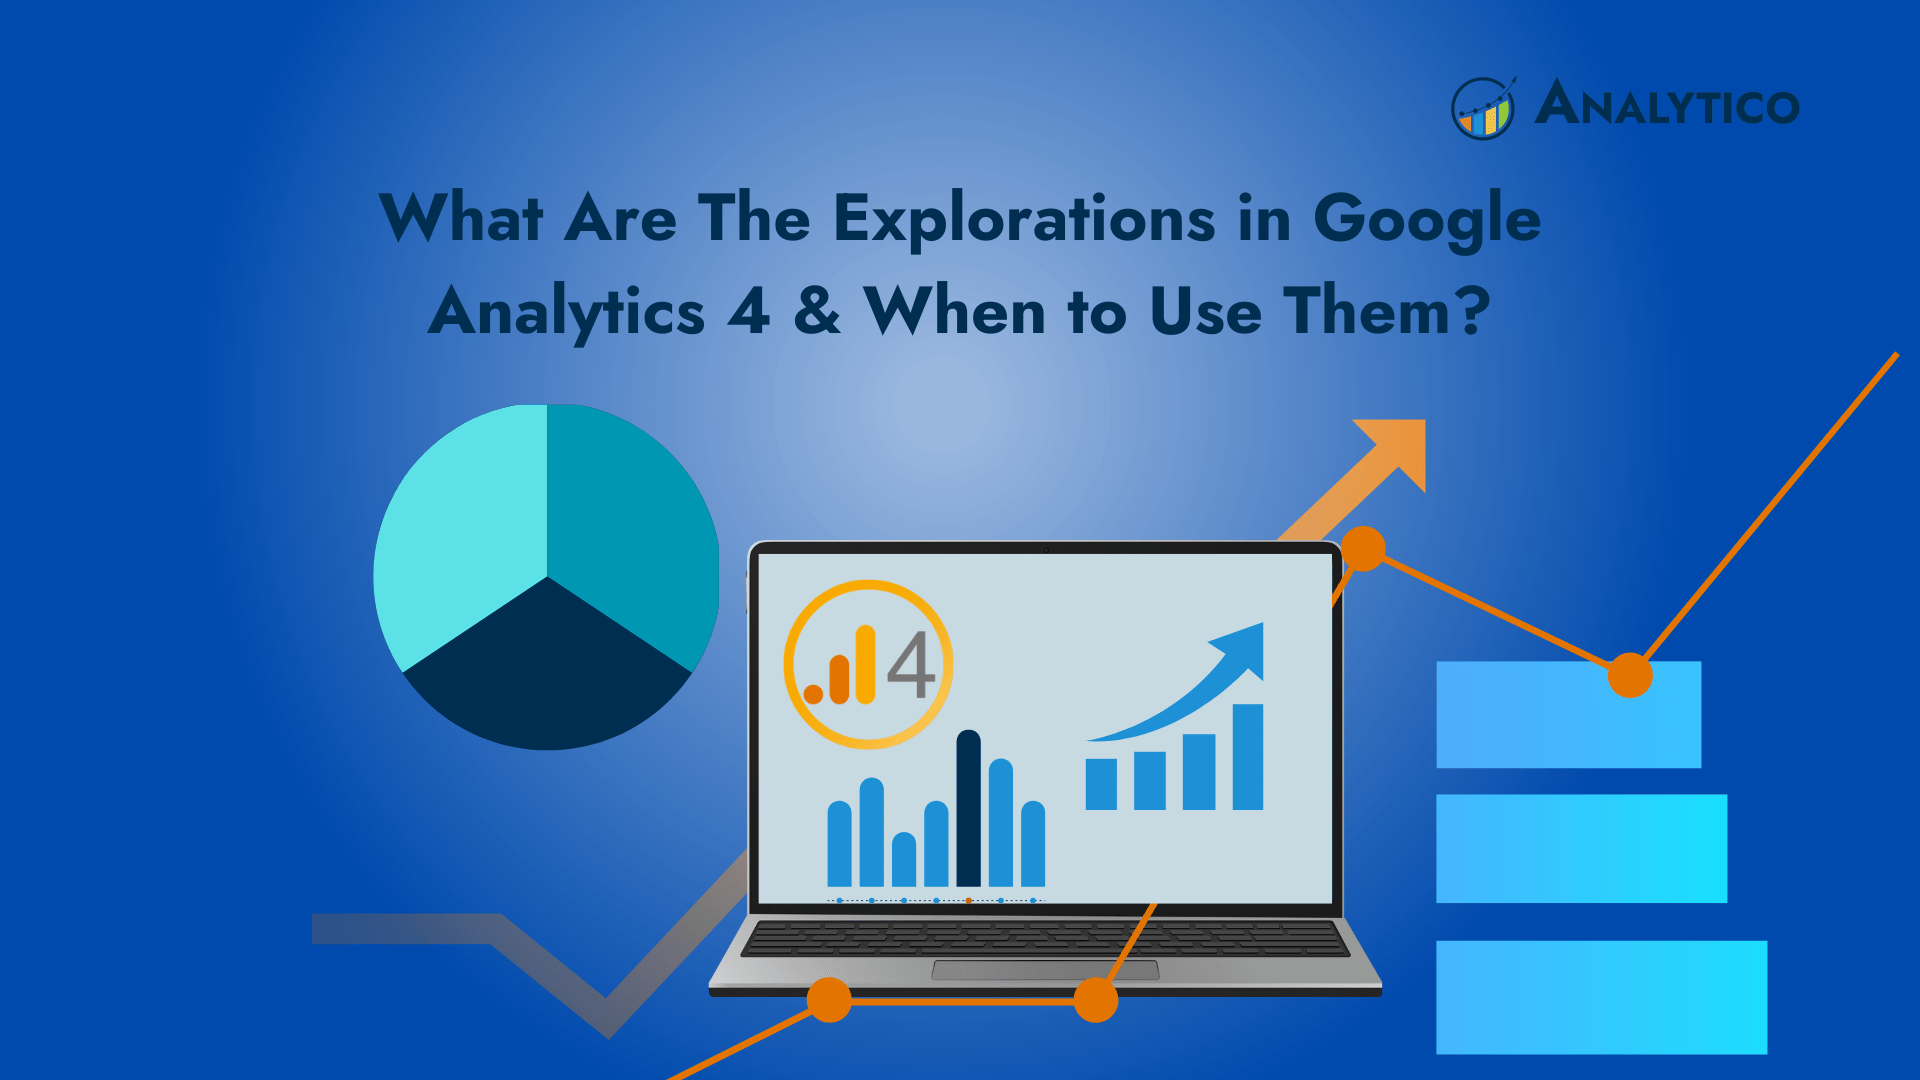 What Are The Explorations in Google Analytics 4 & When to Use Them?